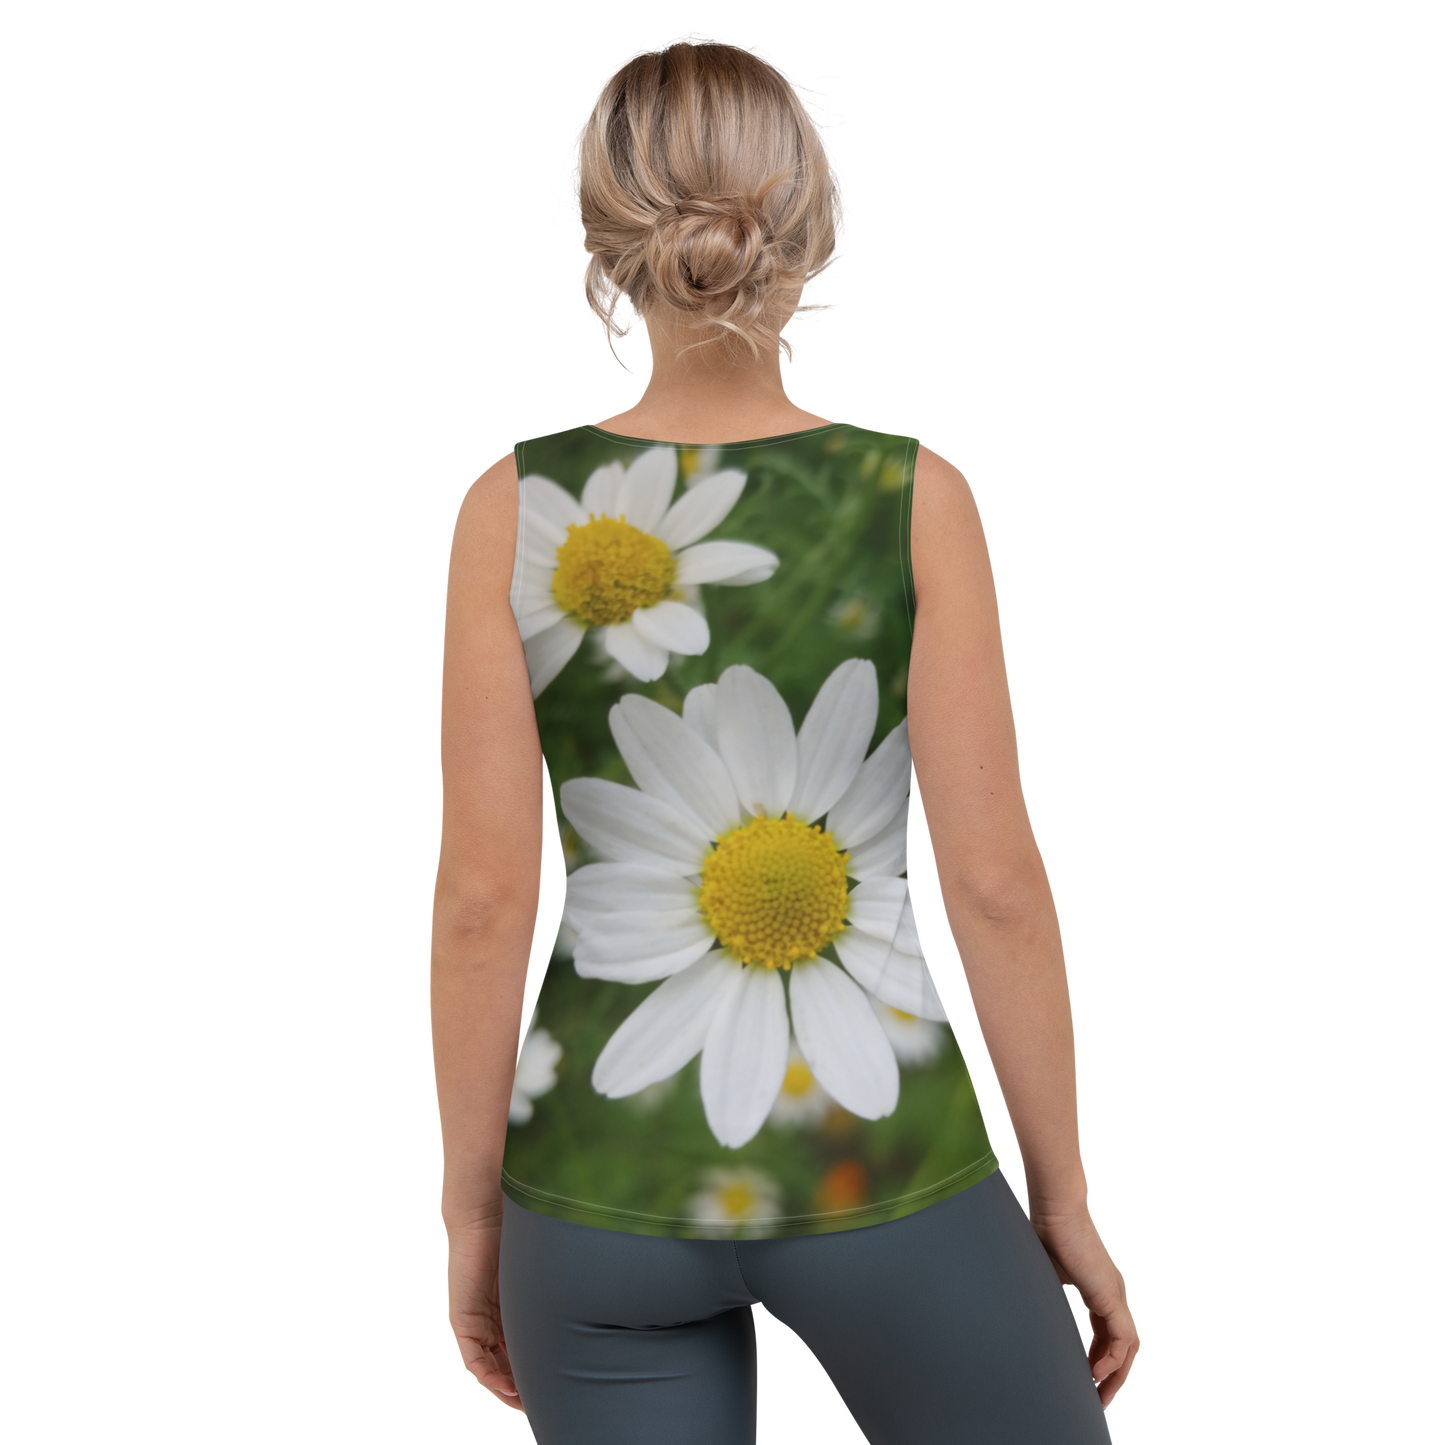 The FLOWER LOVE Collection - "Daisy Daydreams" Design Tank Top